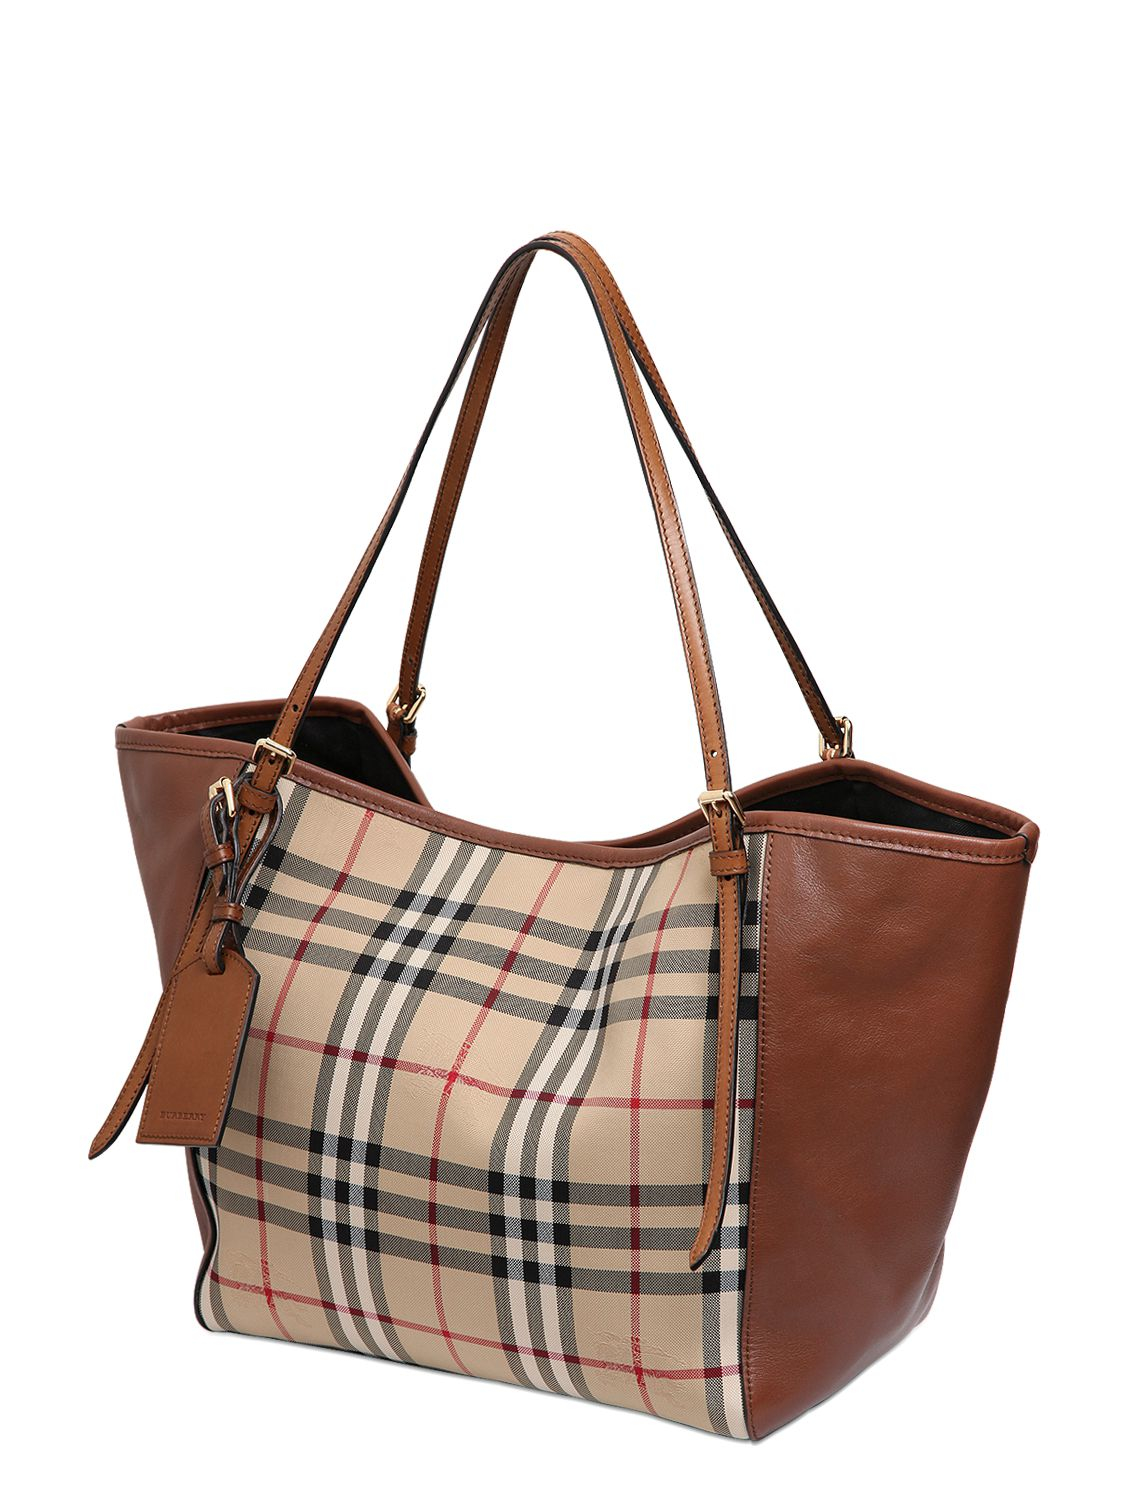 Burberry Purse Brown Leather With 